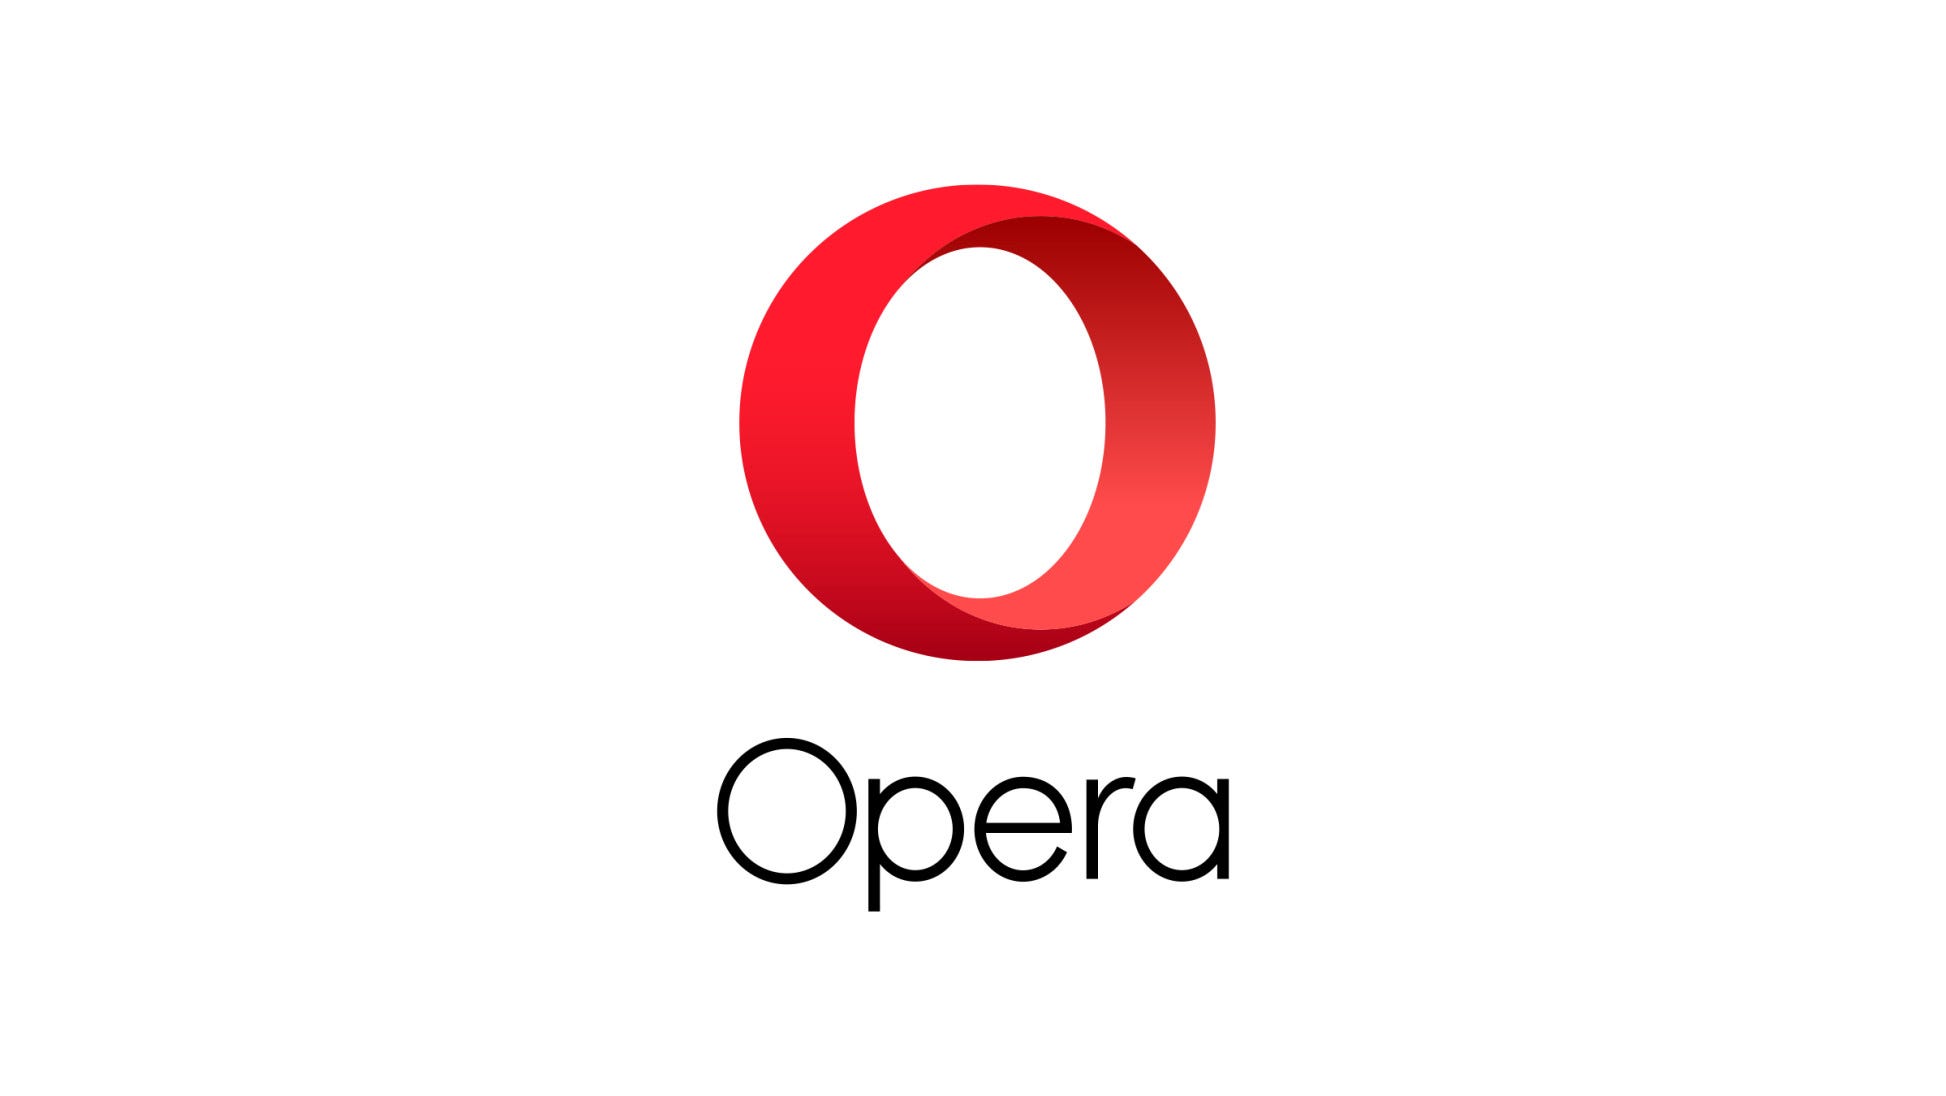 The results of world's largest gaming survey by Opera GX are in